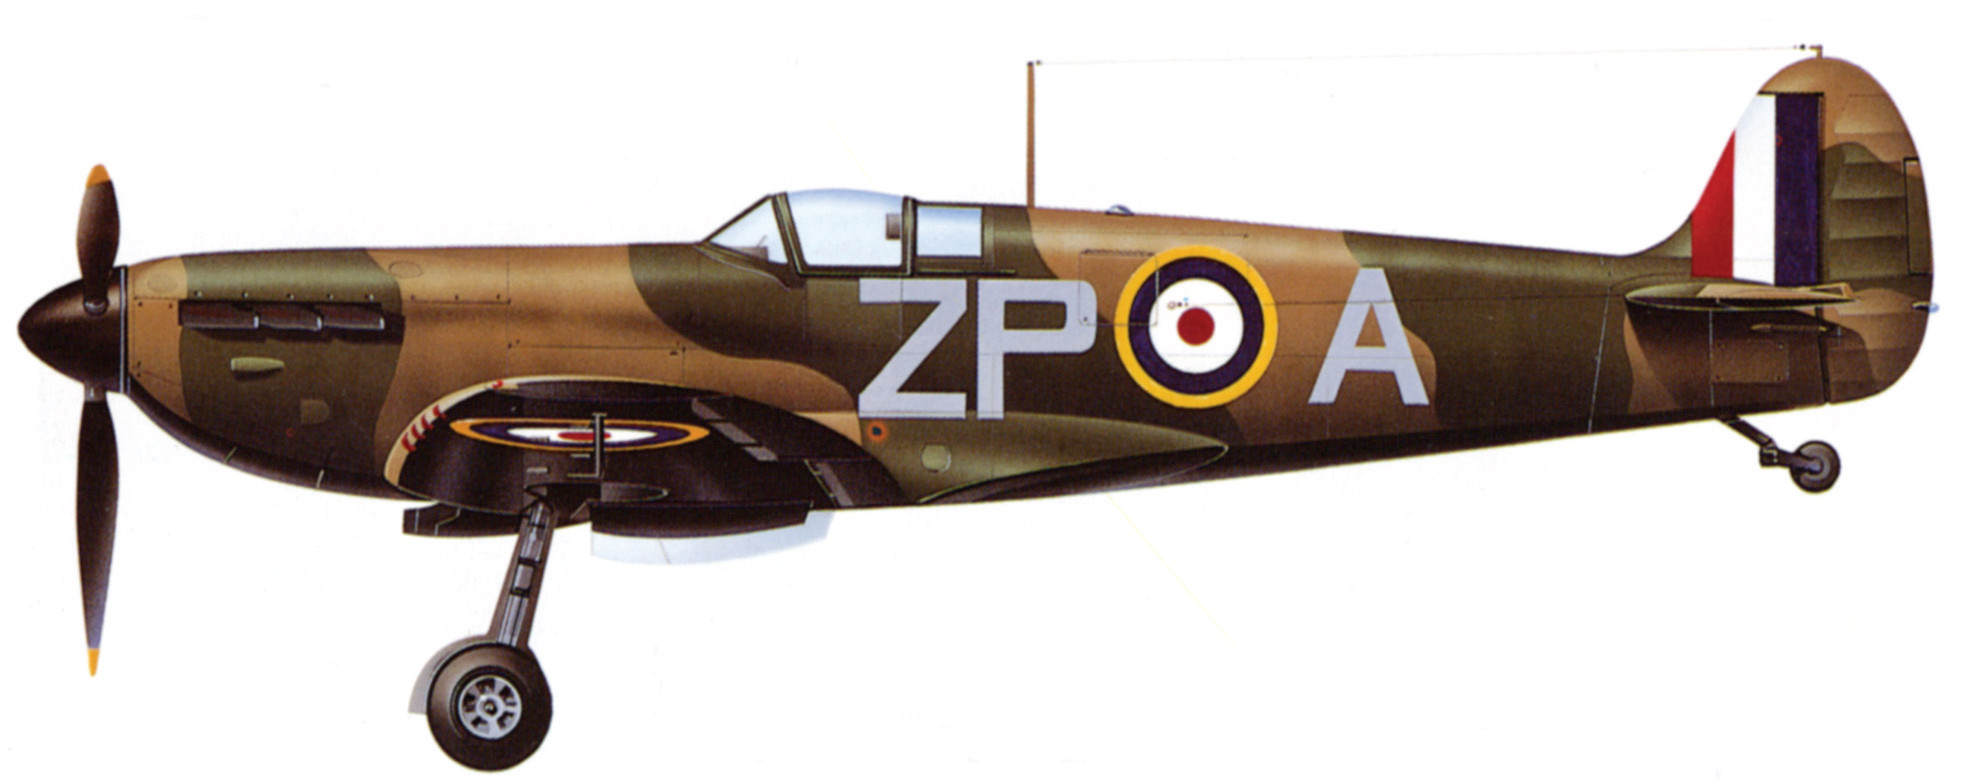 A Supermarine Spitfire Mk I of the No. 74 Squadron, which served during the Battle of Britain, reveals the dark camouflage scheme in use at the time of the battle and the sleek profile of the famed fighter. (Amber Books)